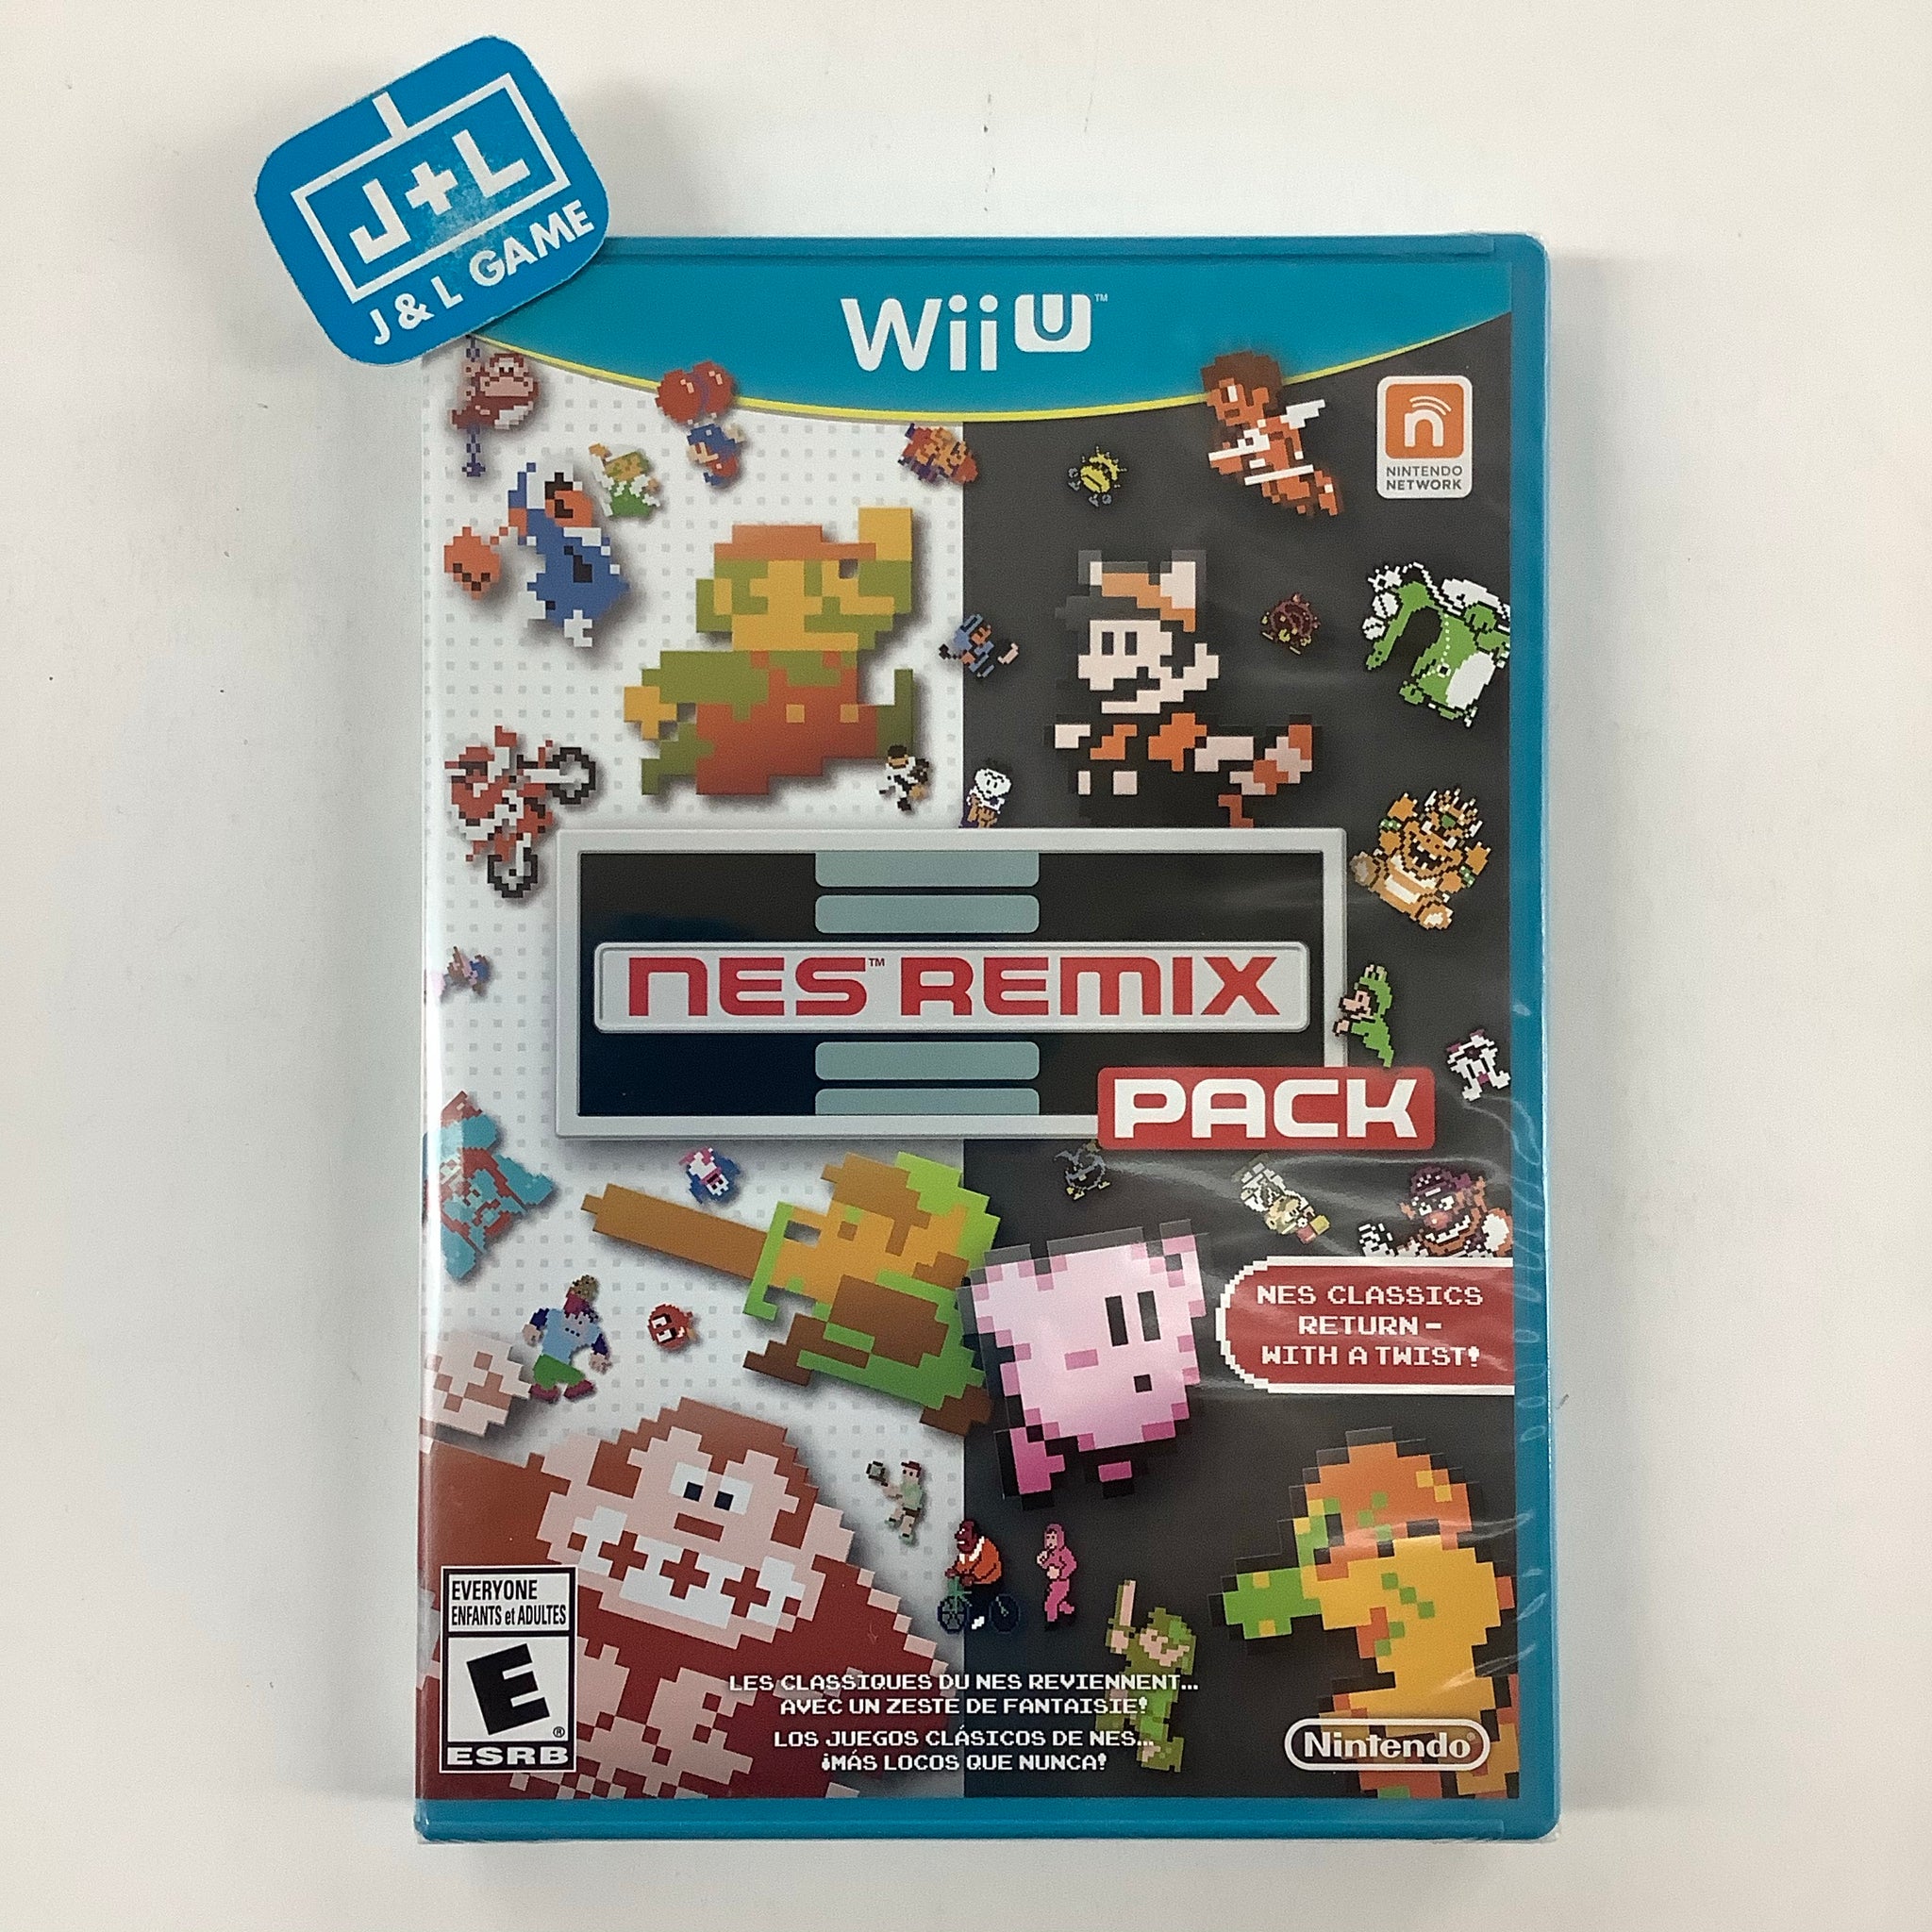 Pre-Owned - Nintendo NES Remix Pack - Nintendo Selects (Wii U) - Video  Games 